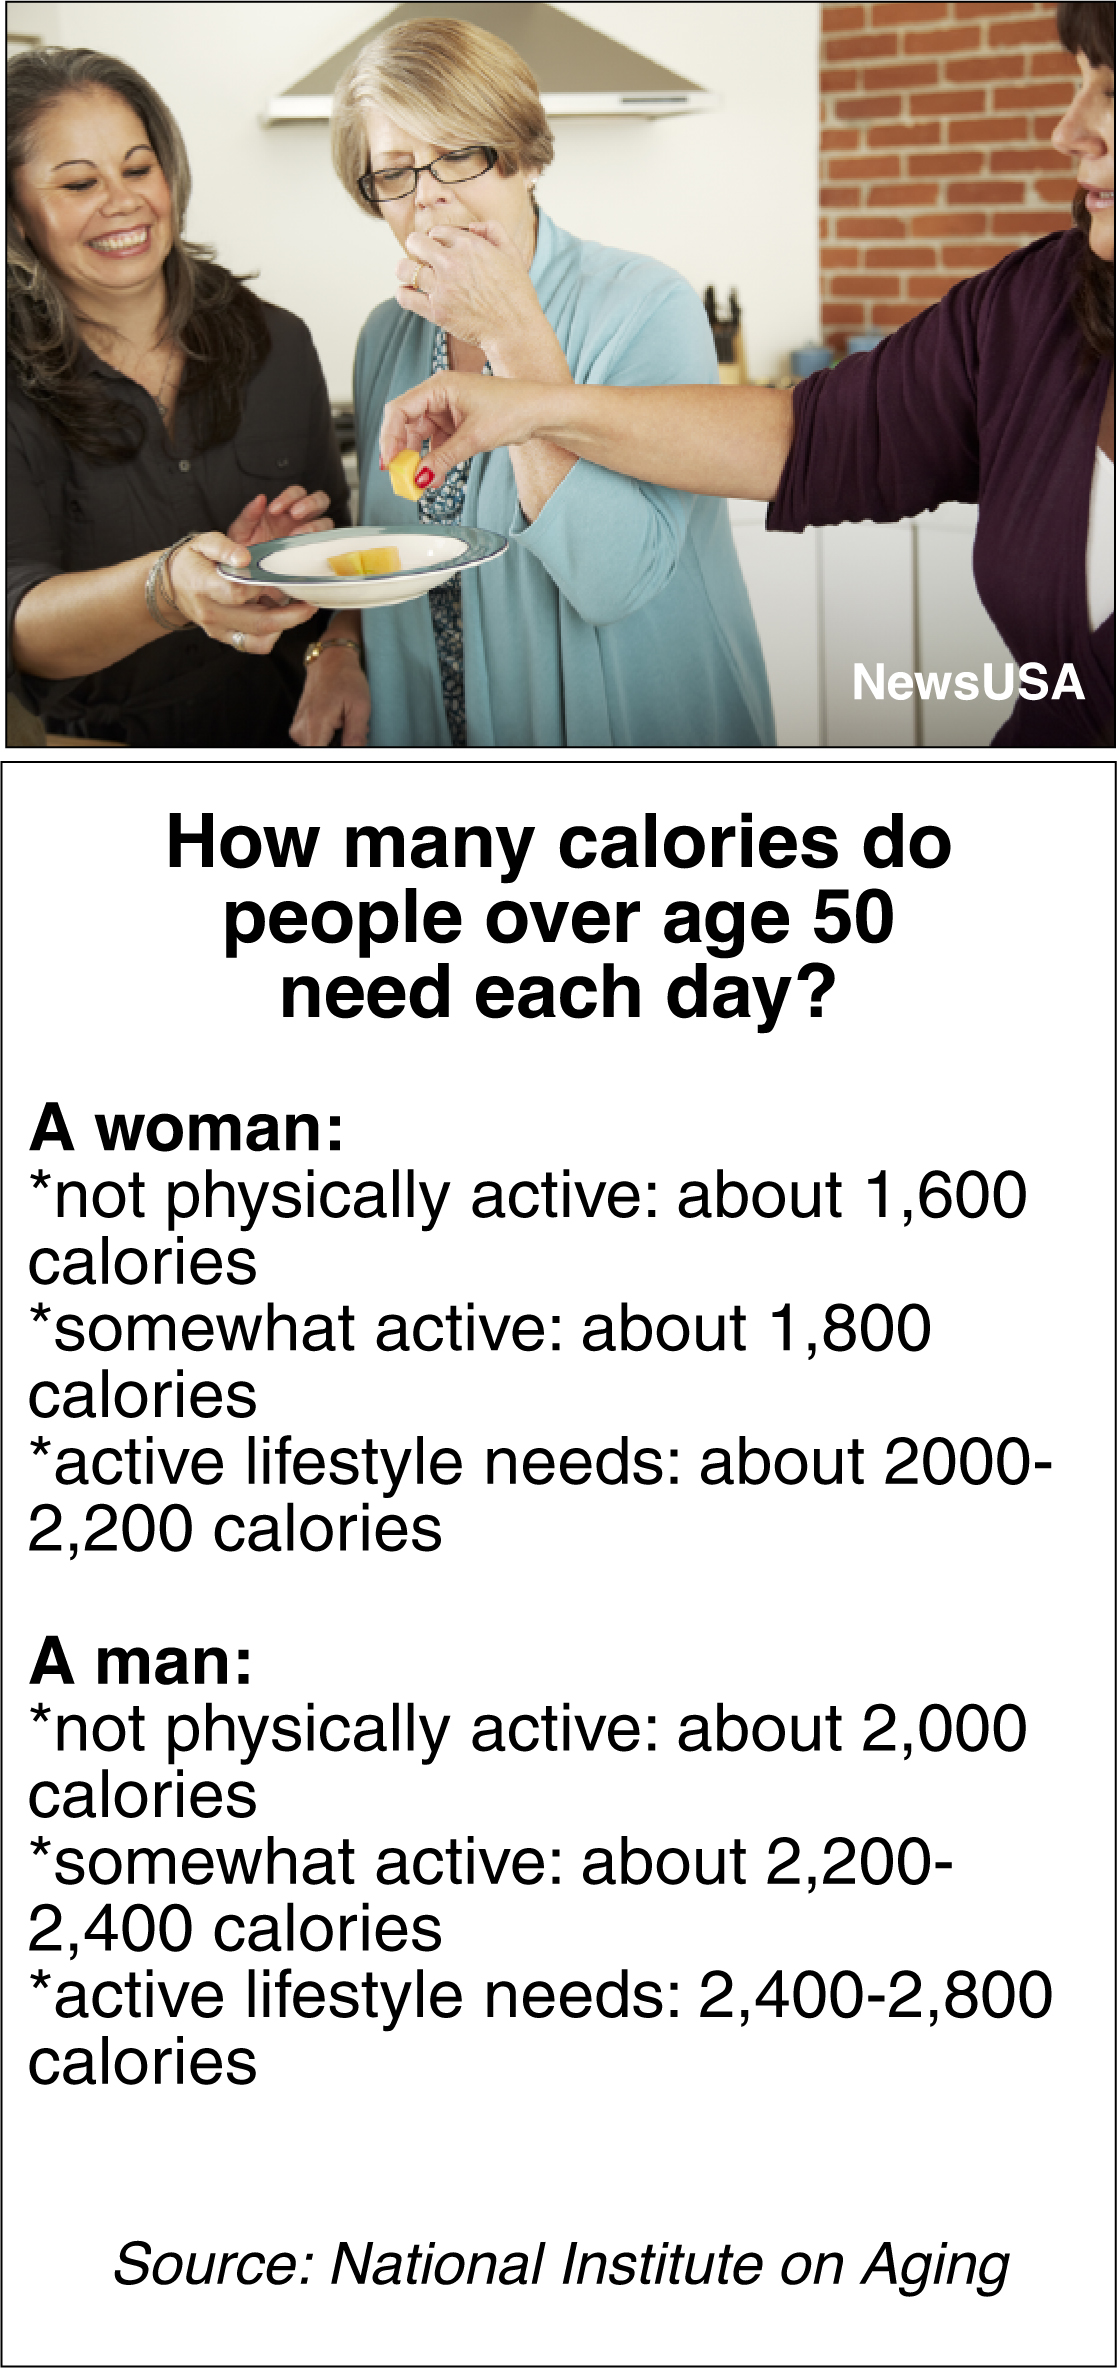 How many calories does a woman need each day?